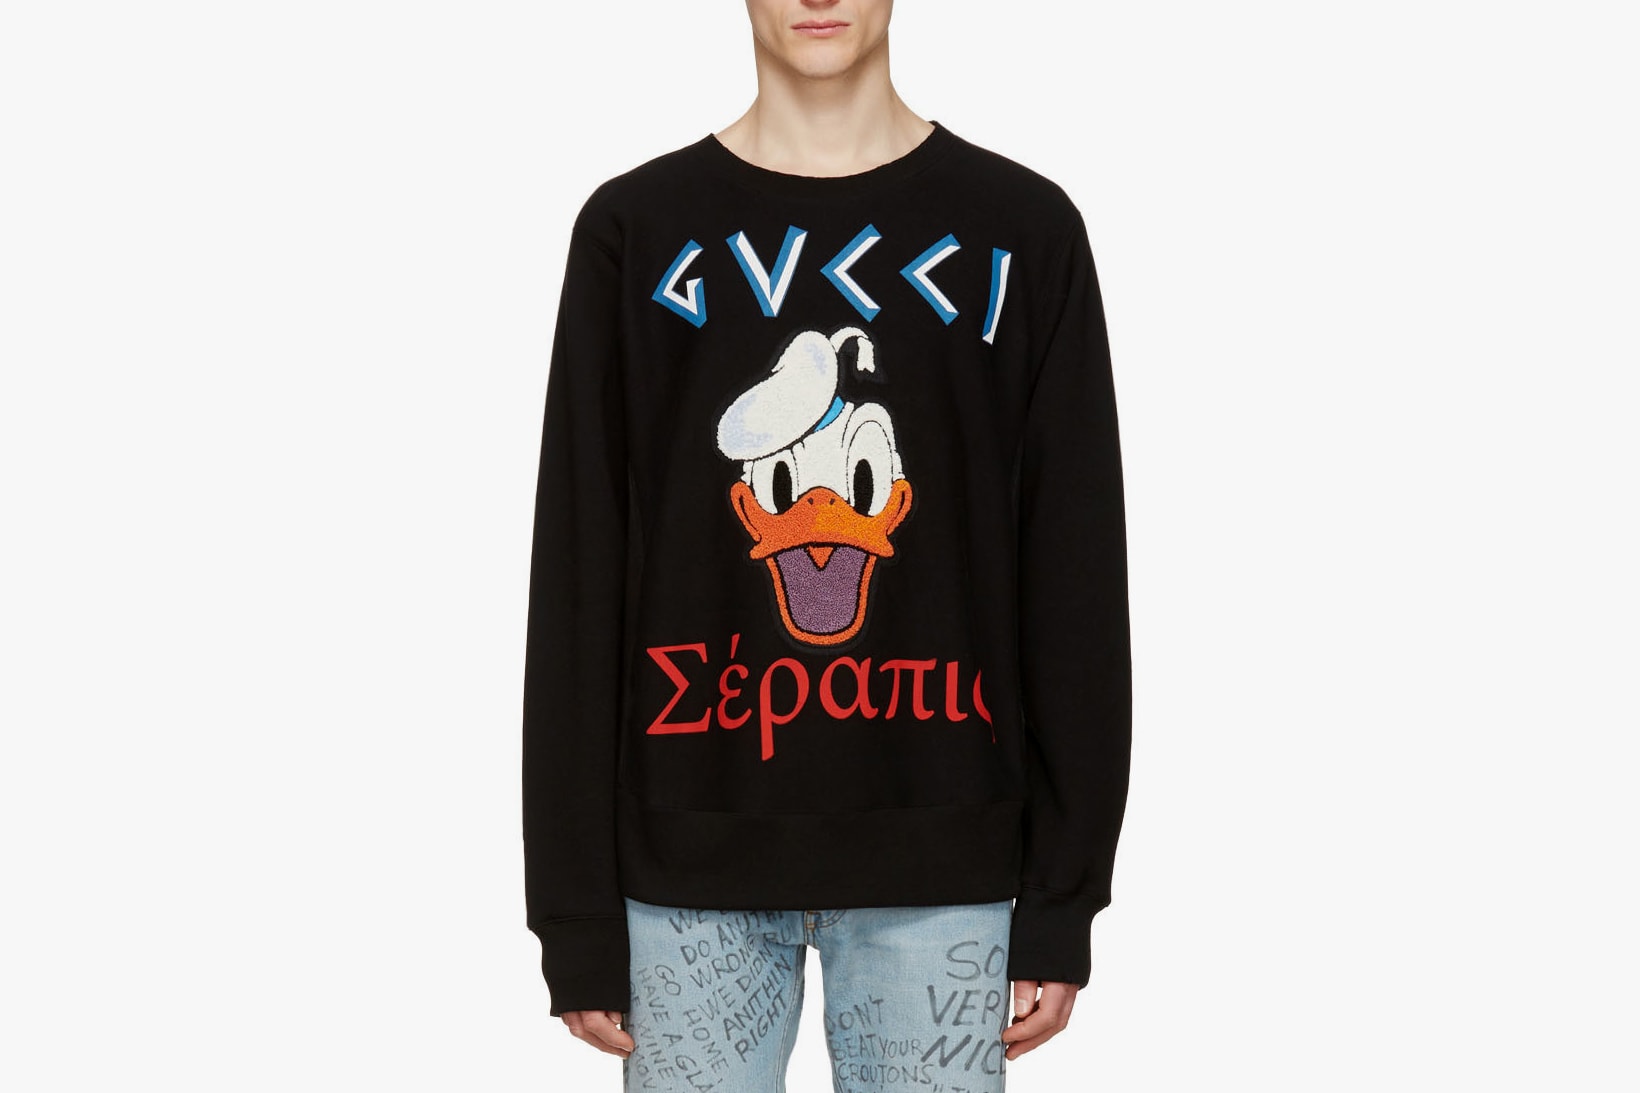 Gucci Donald Duck embroidered t-shirt